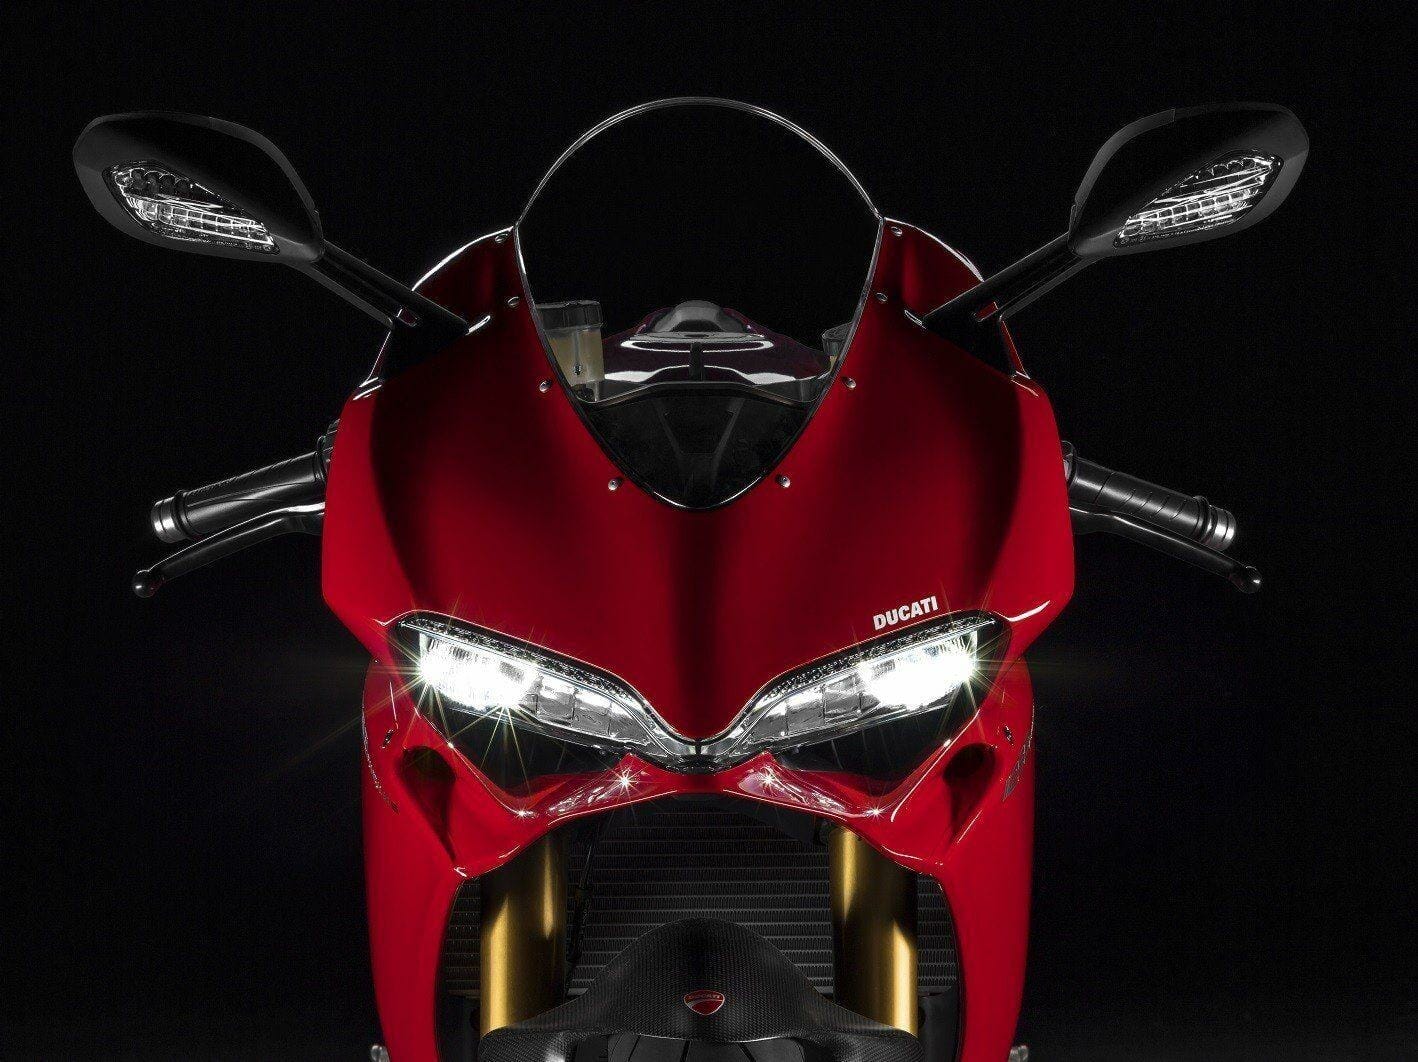 Ducati Panigale 1299, Panigale 1299 S and Panigale R from 2015